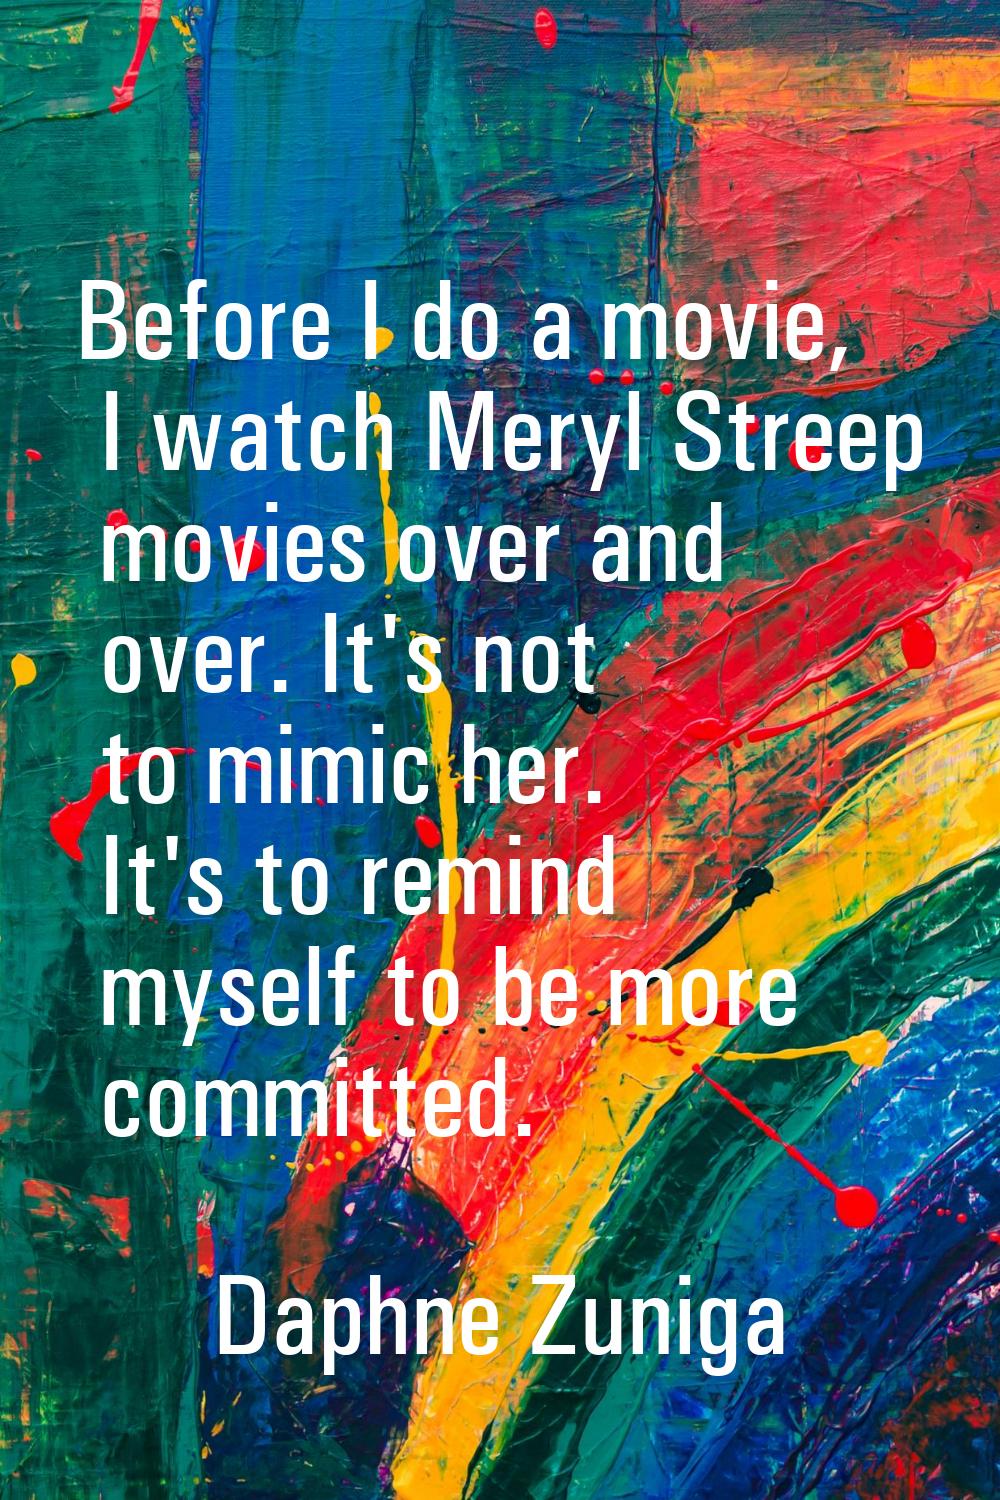 Before I do a movie, I watch Meryl Streep movies over and over. It's not to mimic her. It's to remi